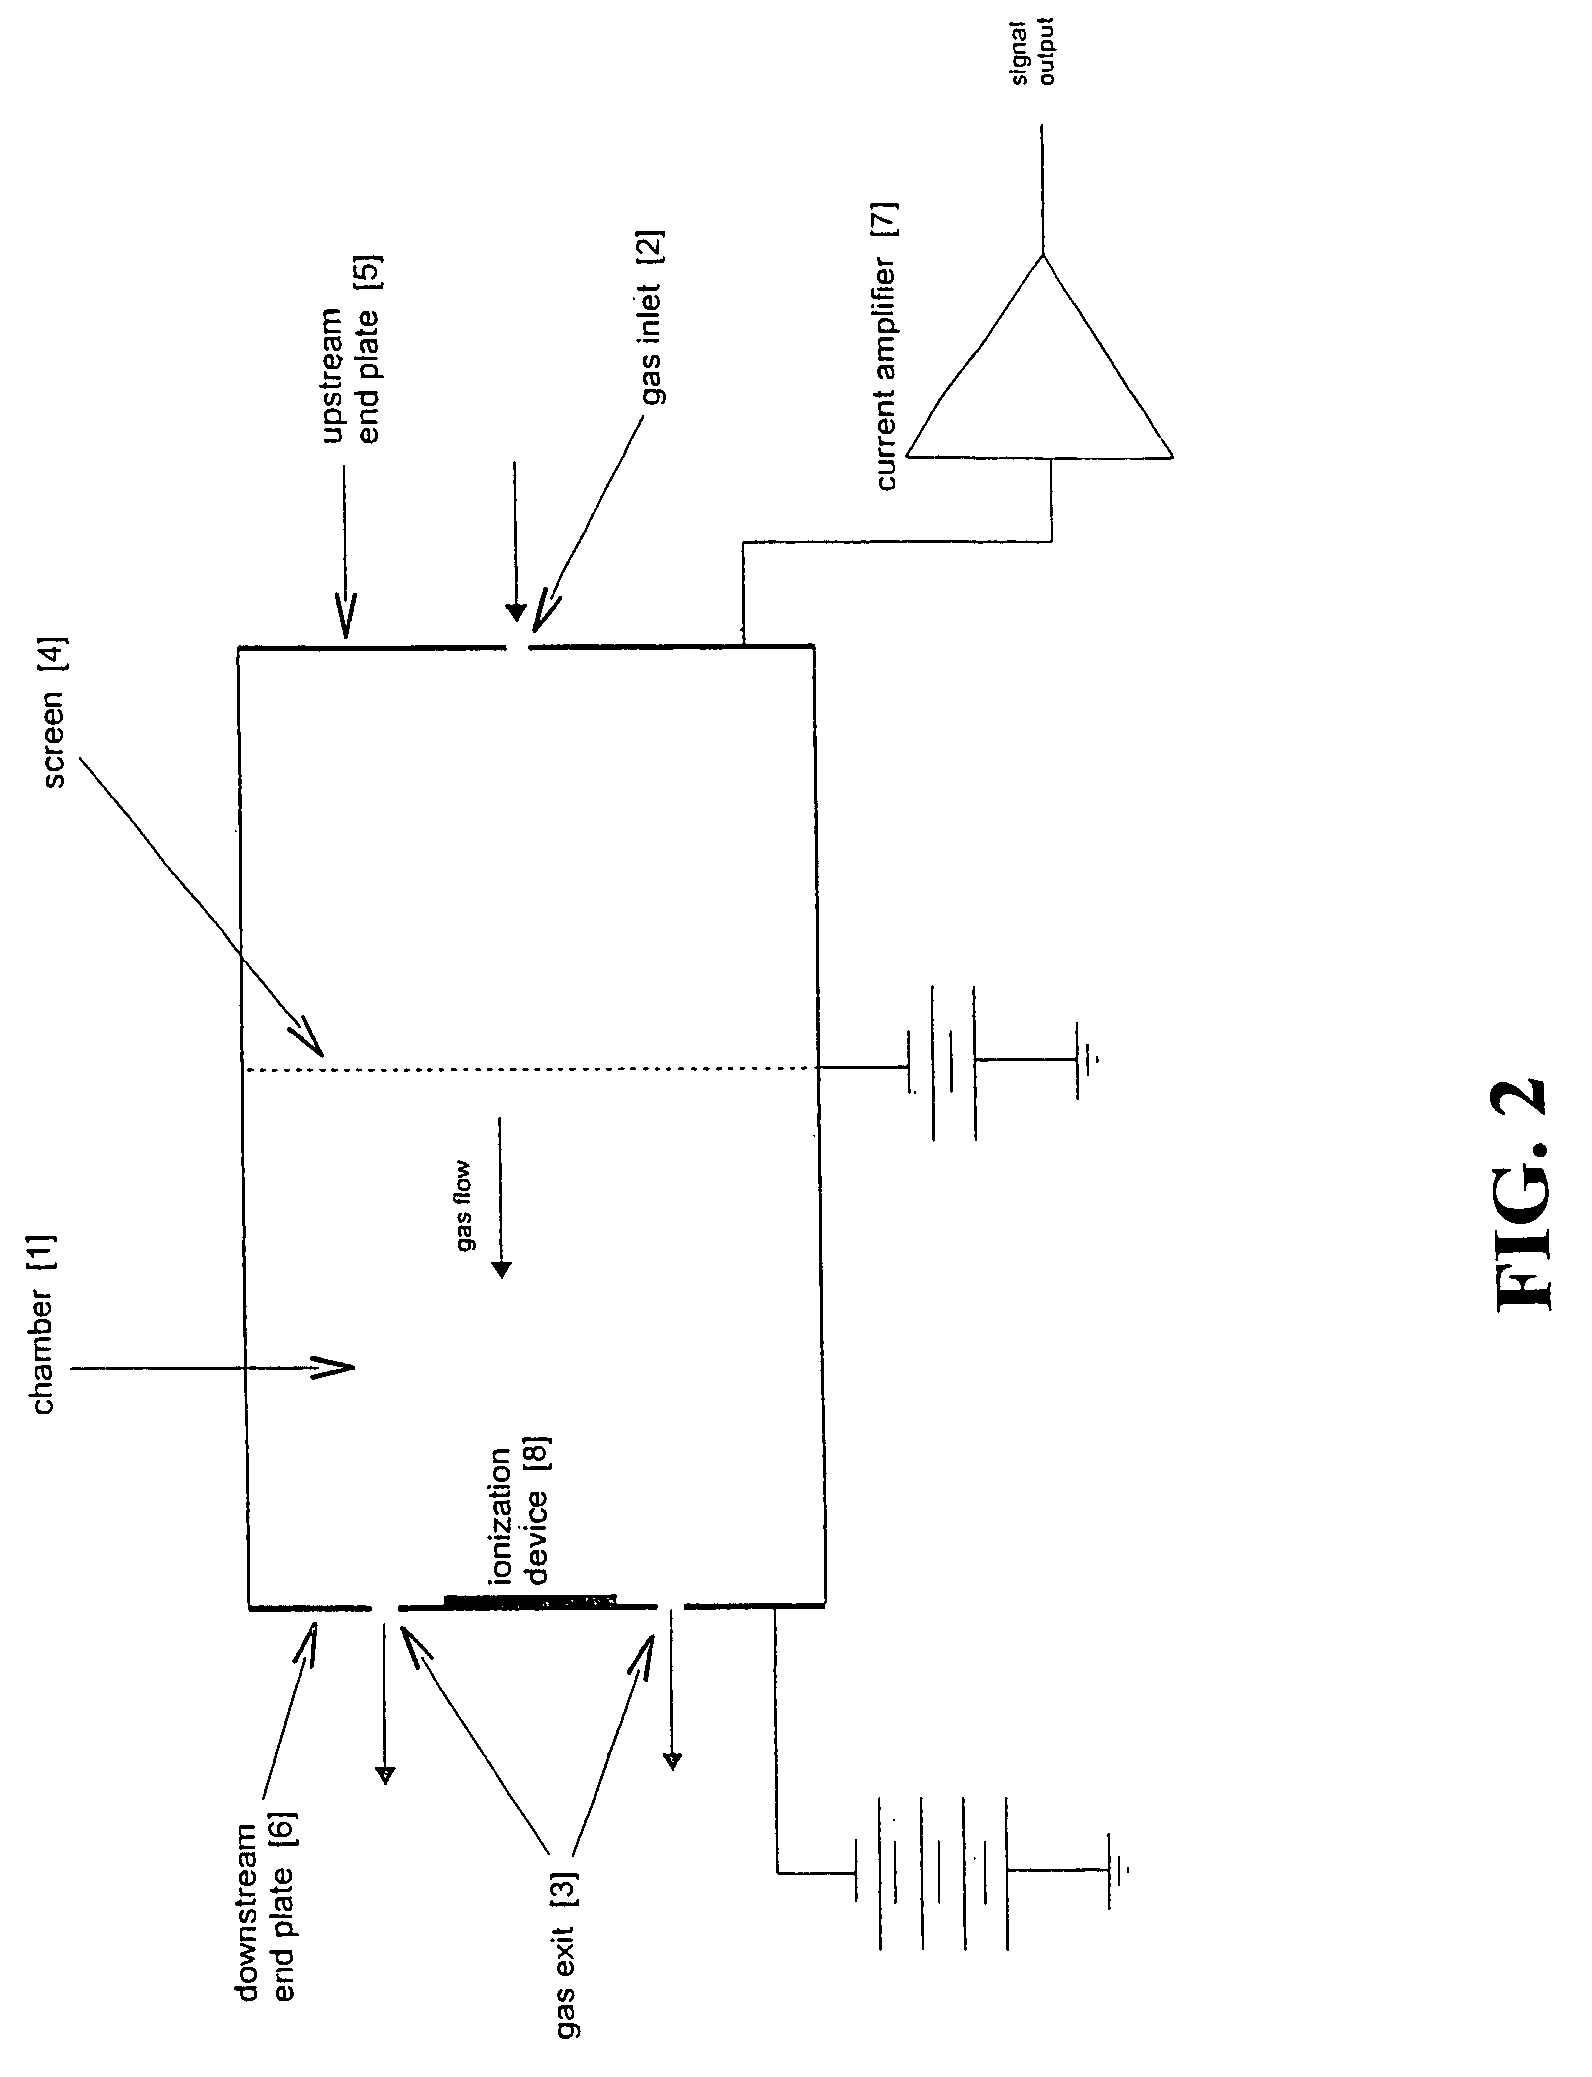 Stepped electric field detector